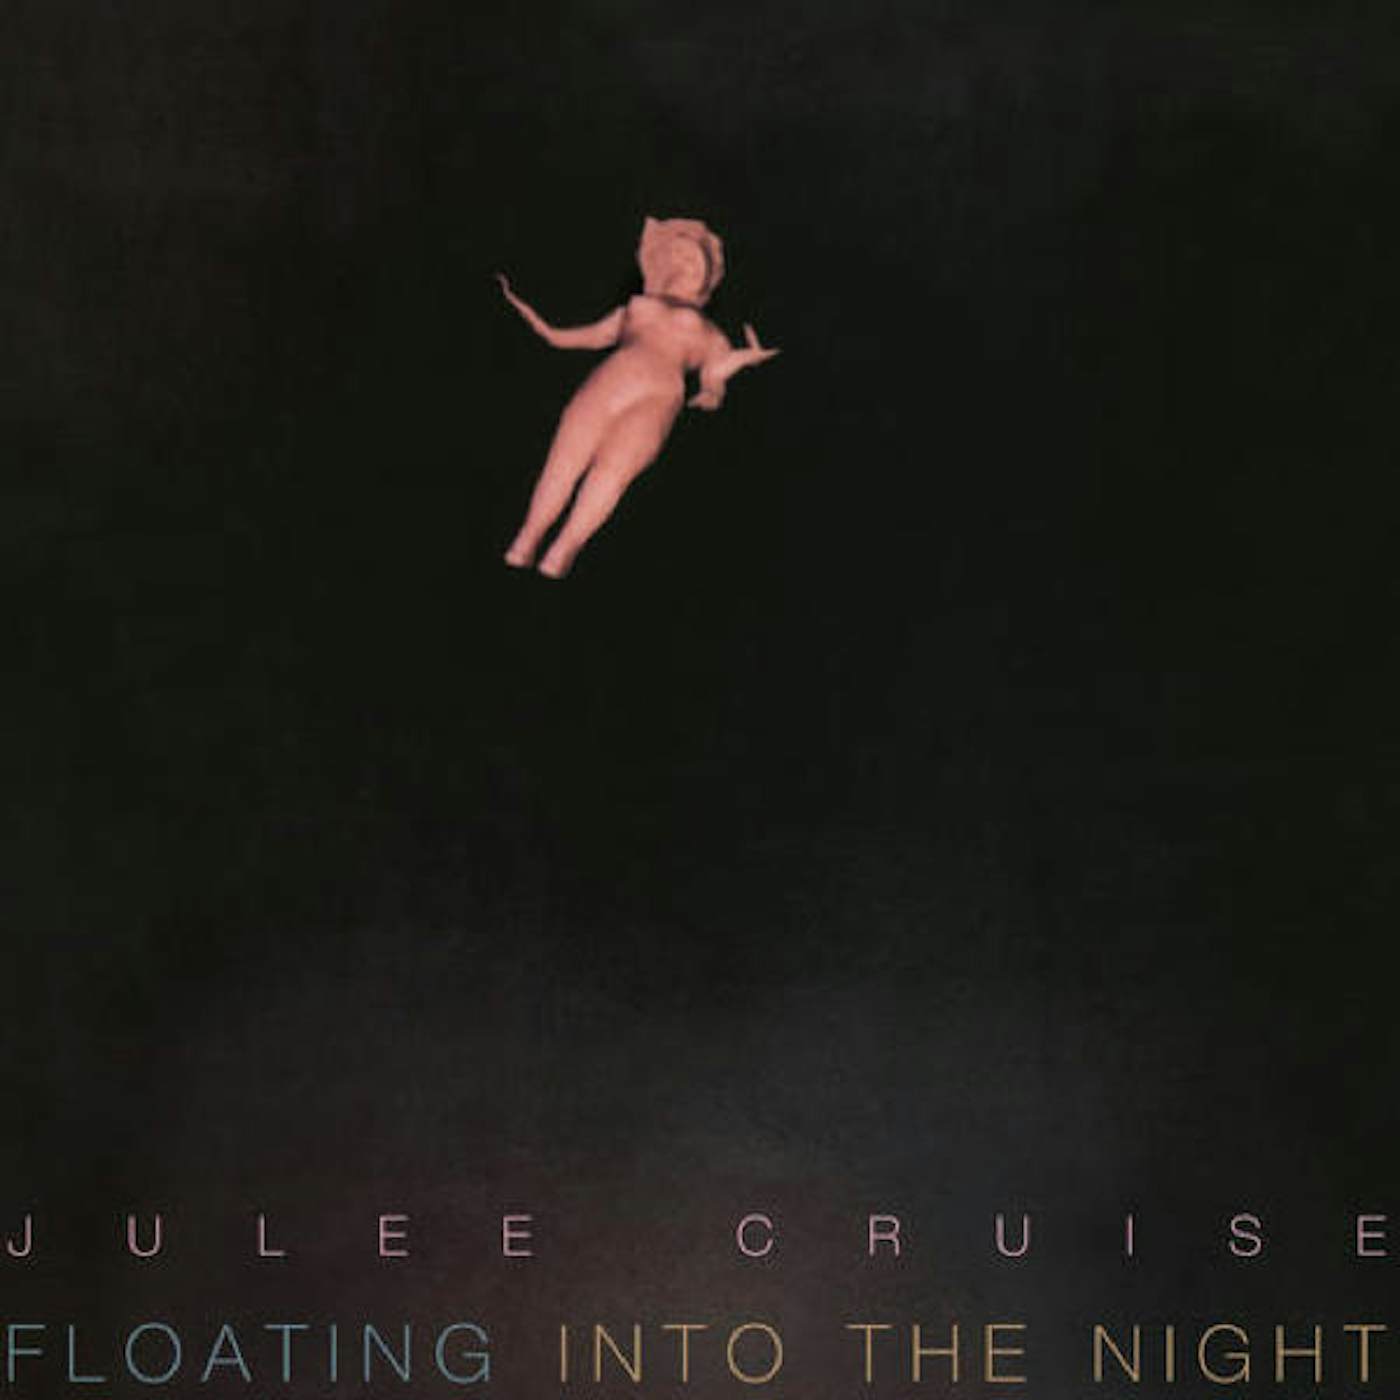 Julee Cruise Floating Into The Night Vinyl Record